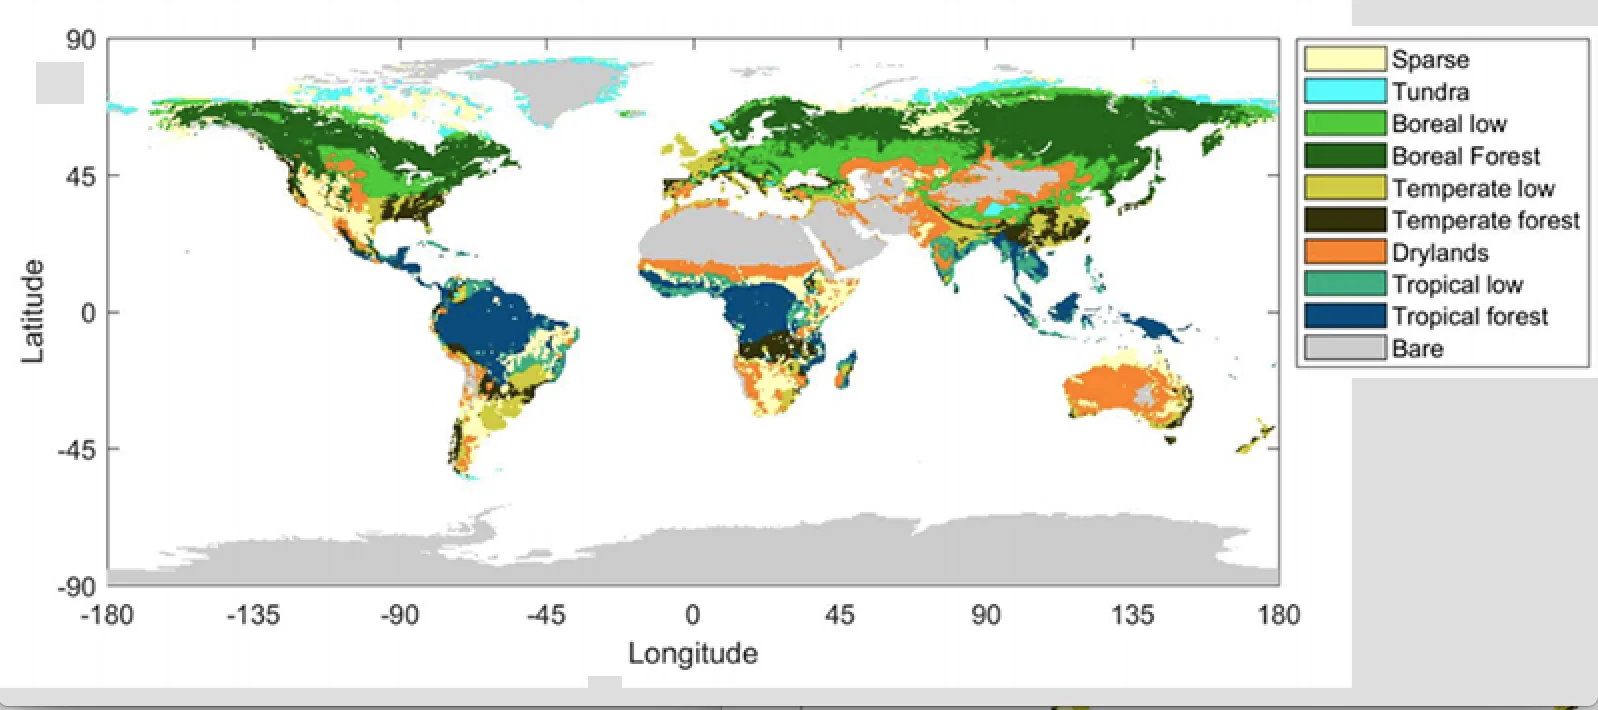 Map 1 Worlds terretrial biomes from Targesson et al